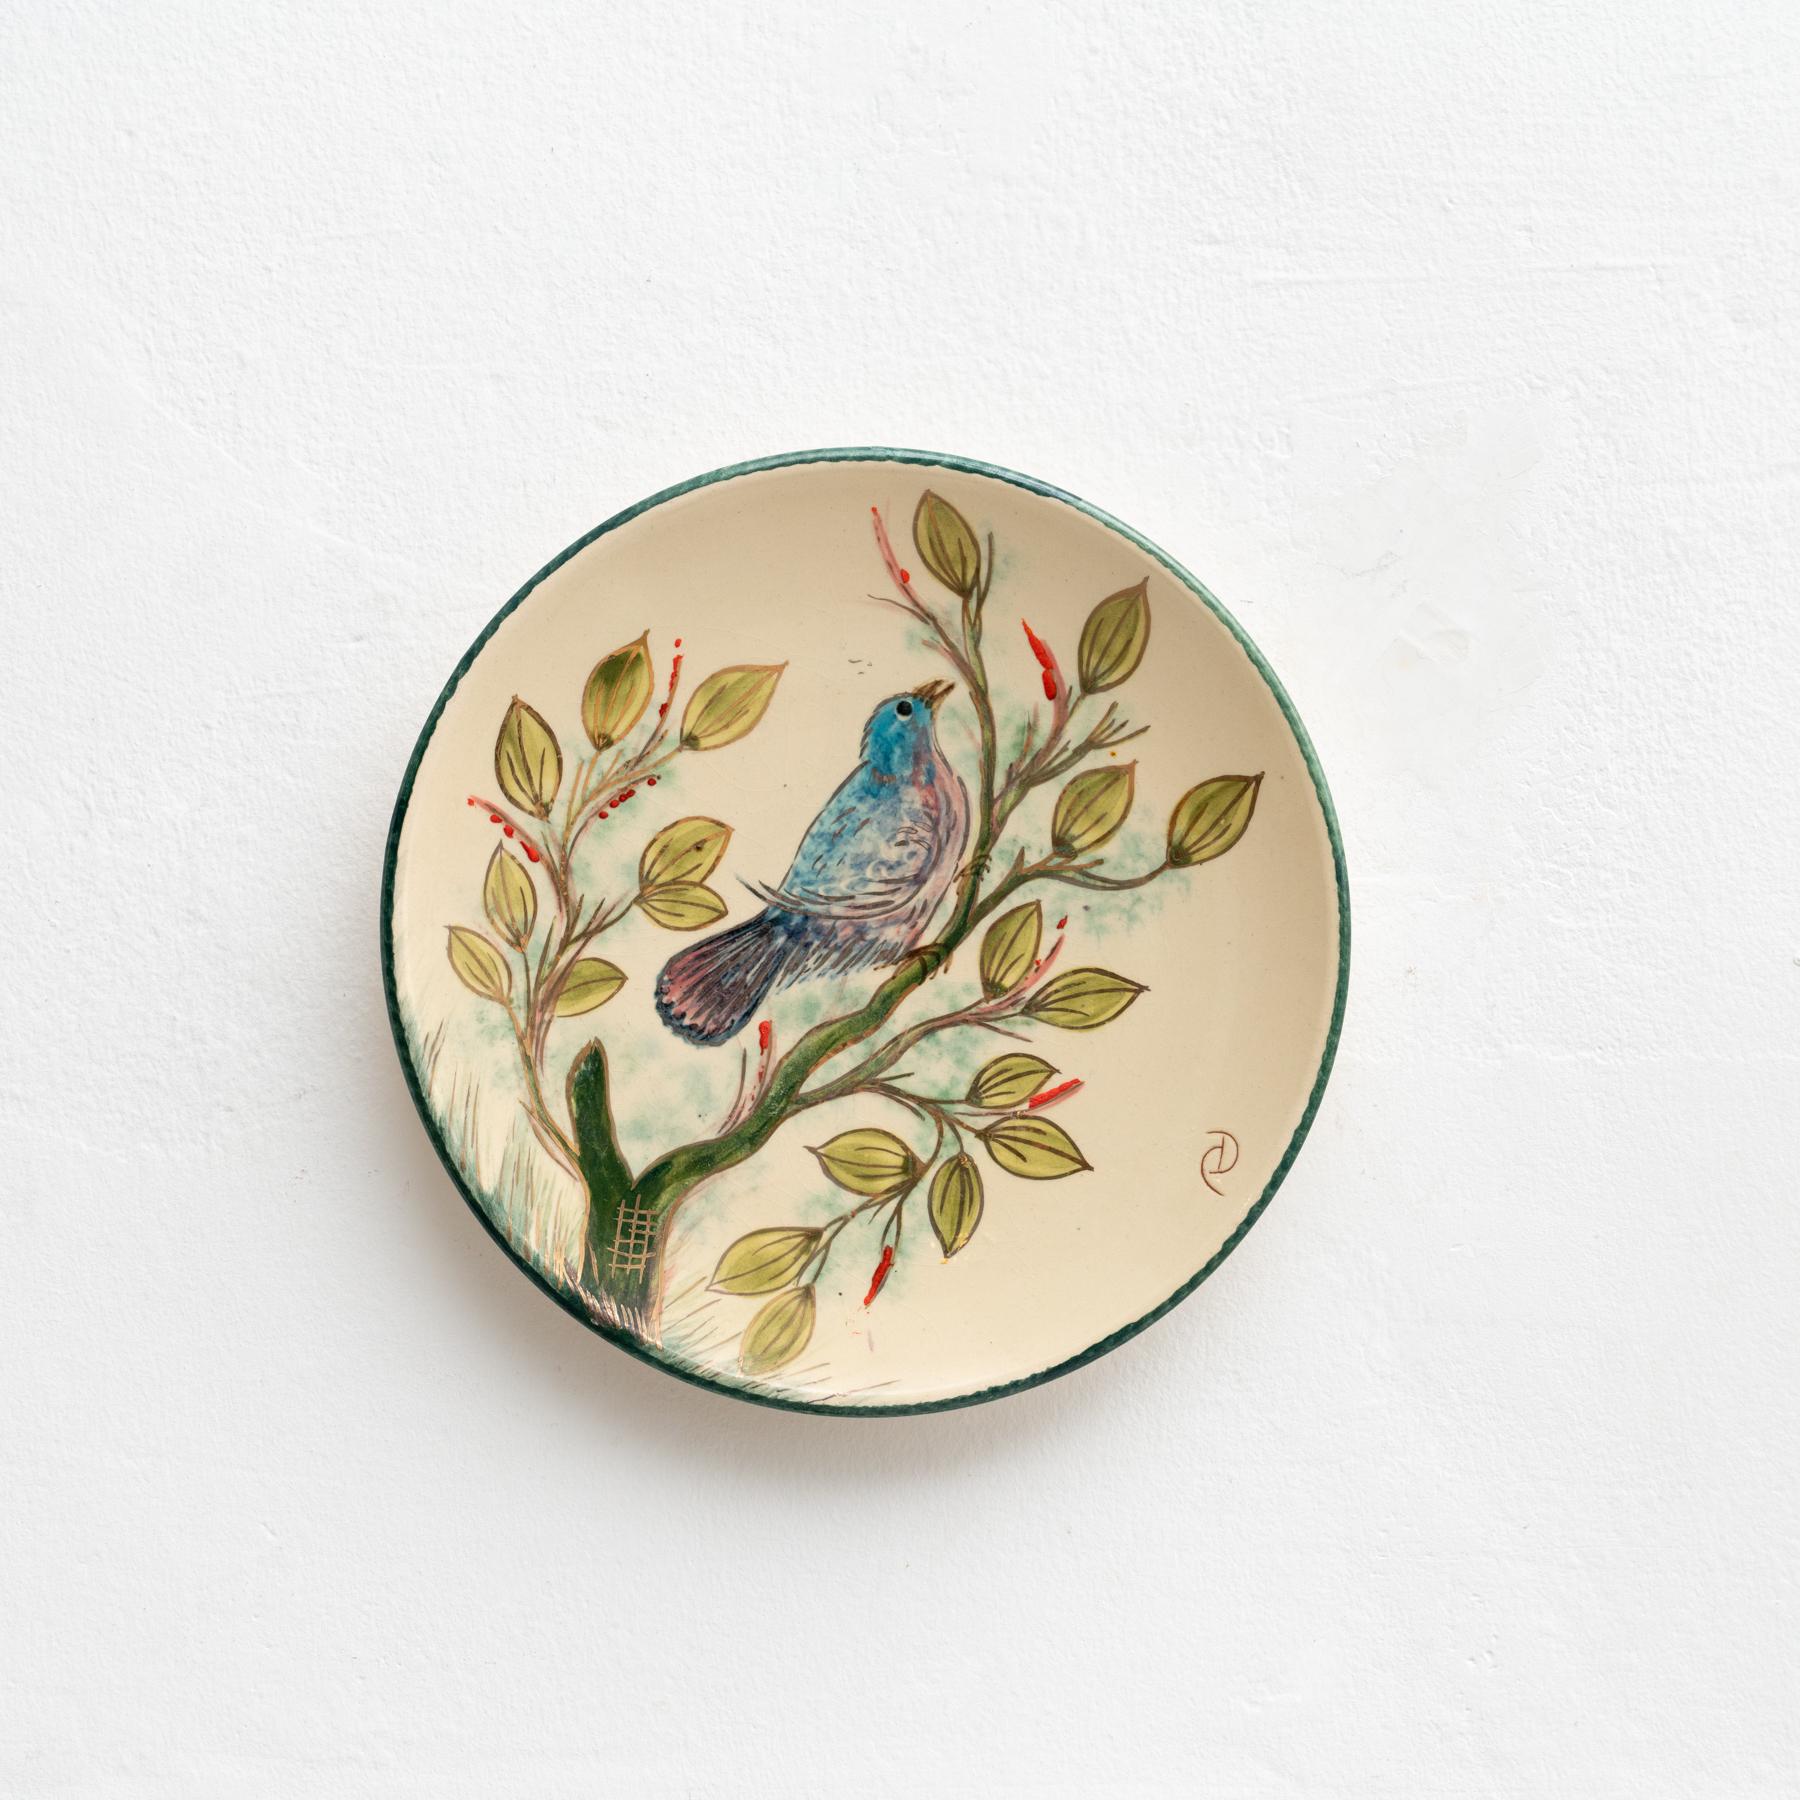 Ceramic hand painted plate artwork by Catalan artist Diaz Costa, circa 1960.

In original condition, with minor wear consistent of age and use, preserving a beautiful patina.

Signed.